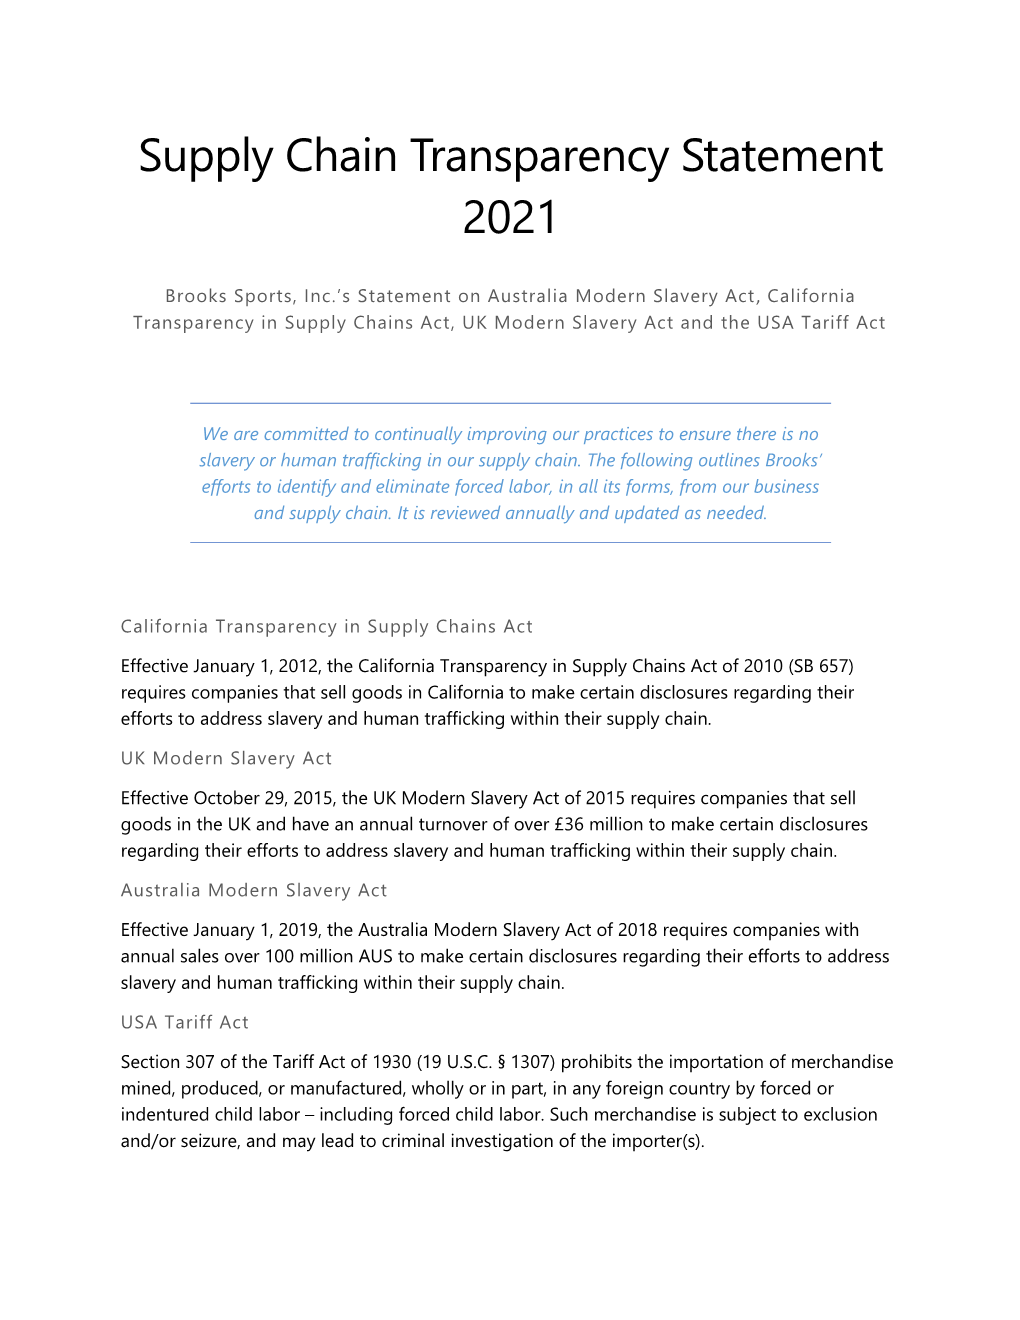 Supply Chain Transparency Statement 2021